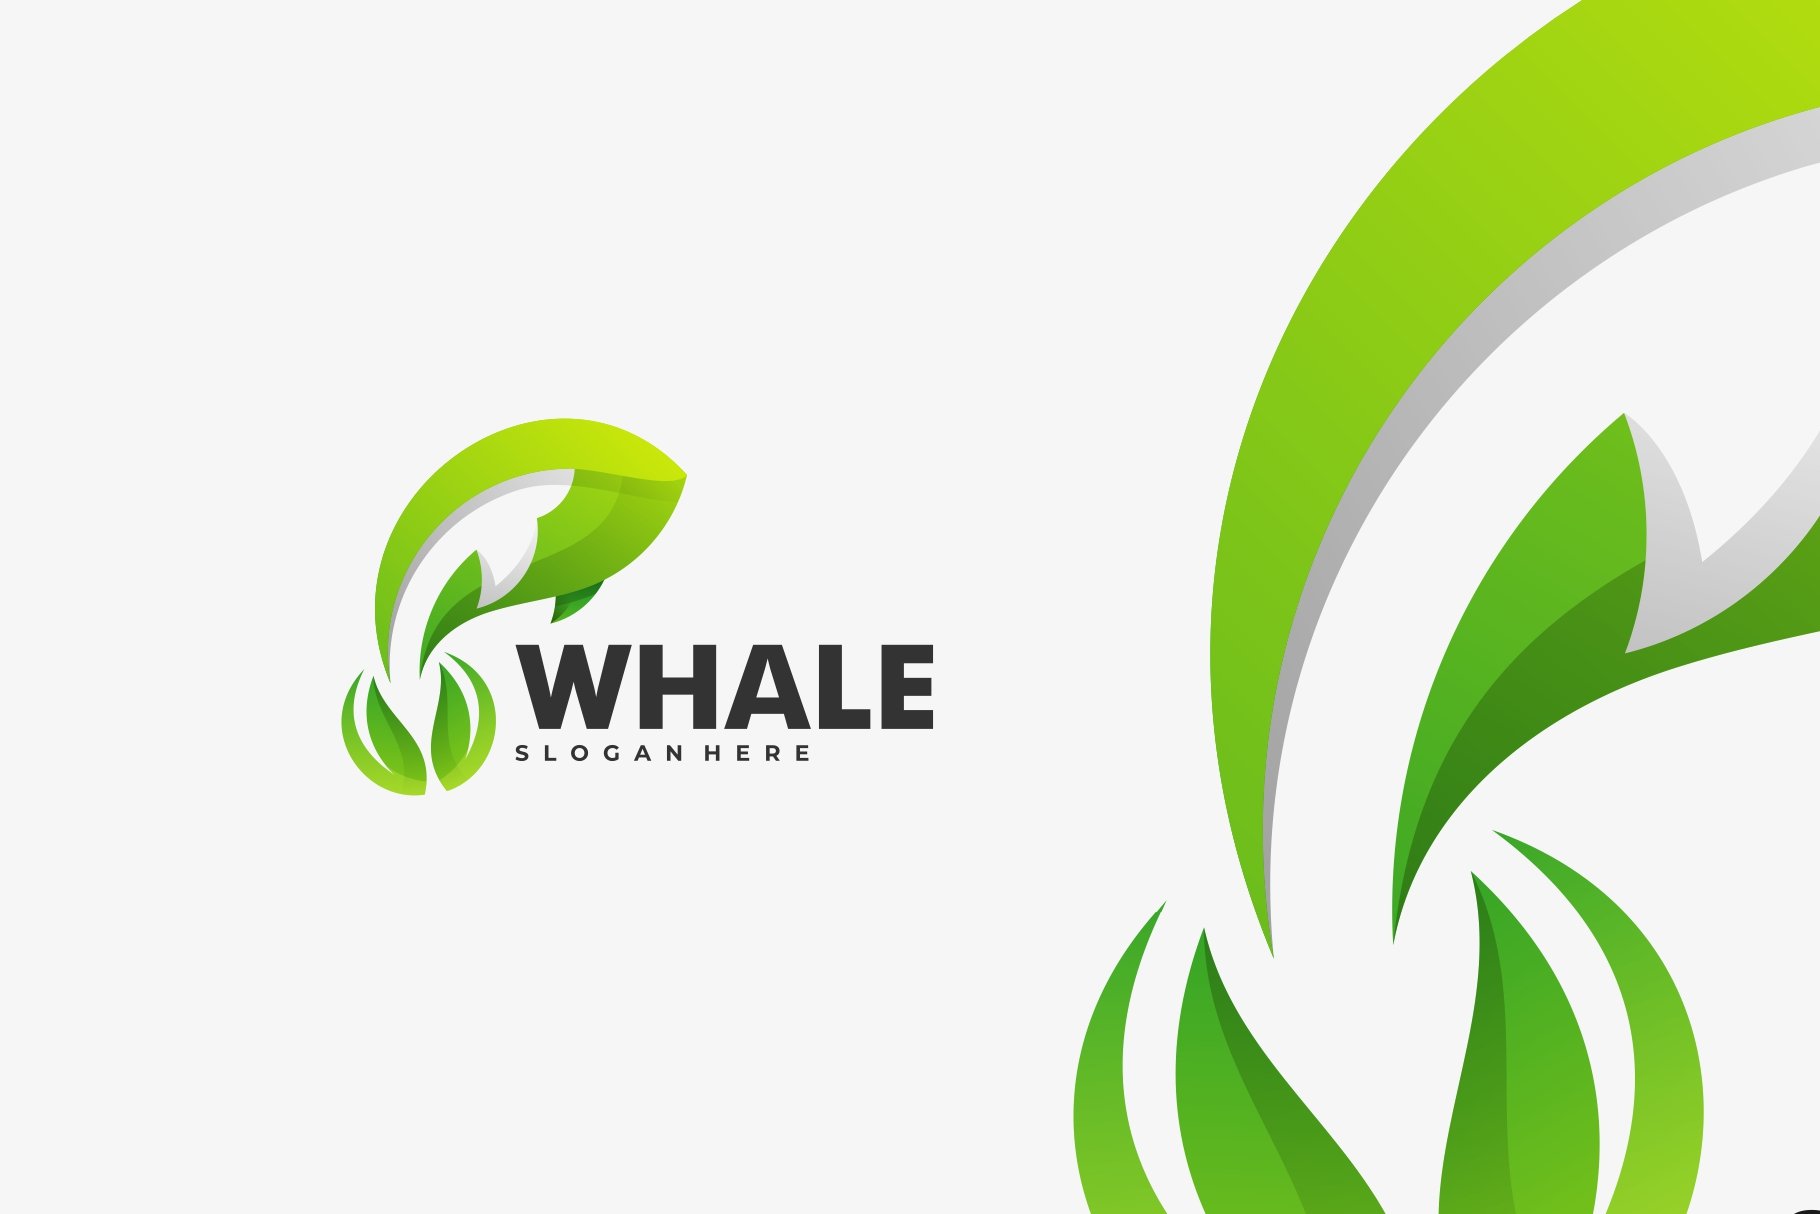 Whale Gradient Logo cover image.